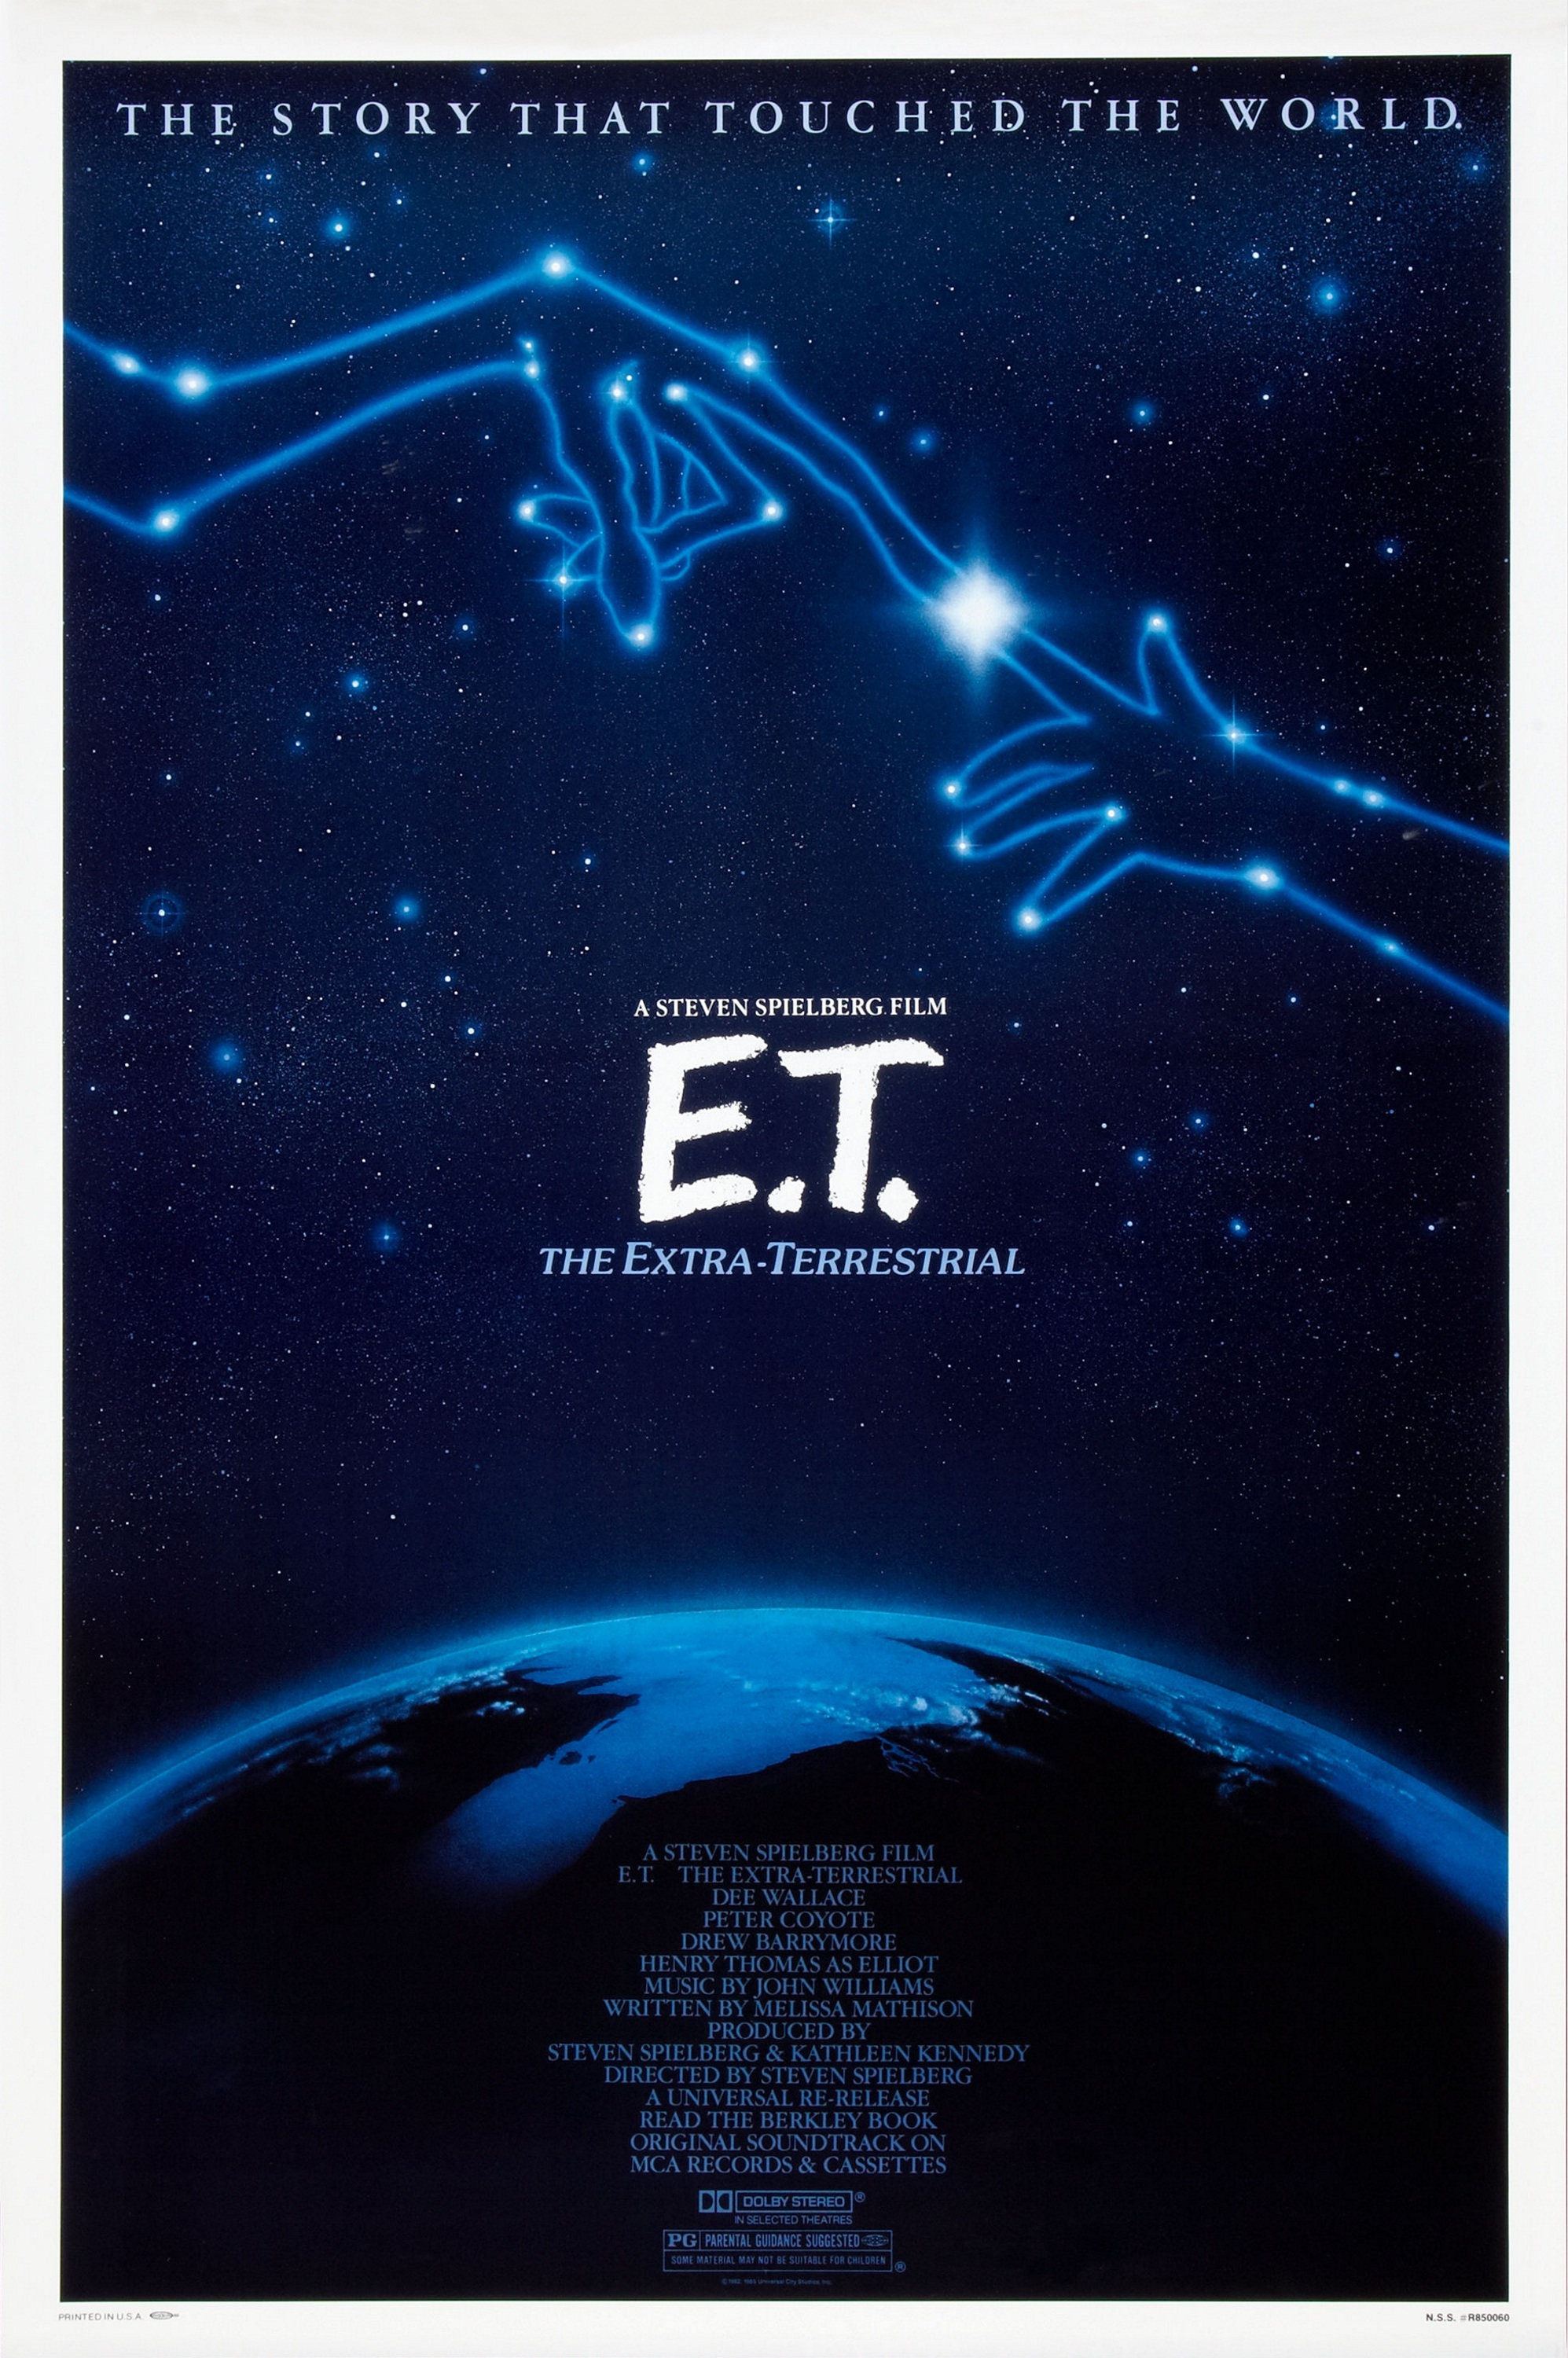 E.T.: The Extra Terrestrial Image E.T.: The Extra Terrestrial HD